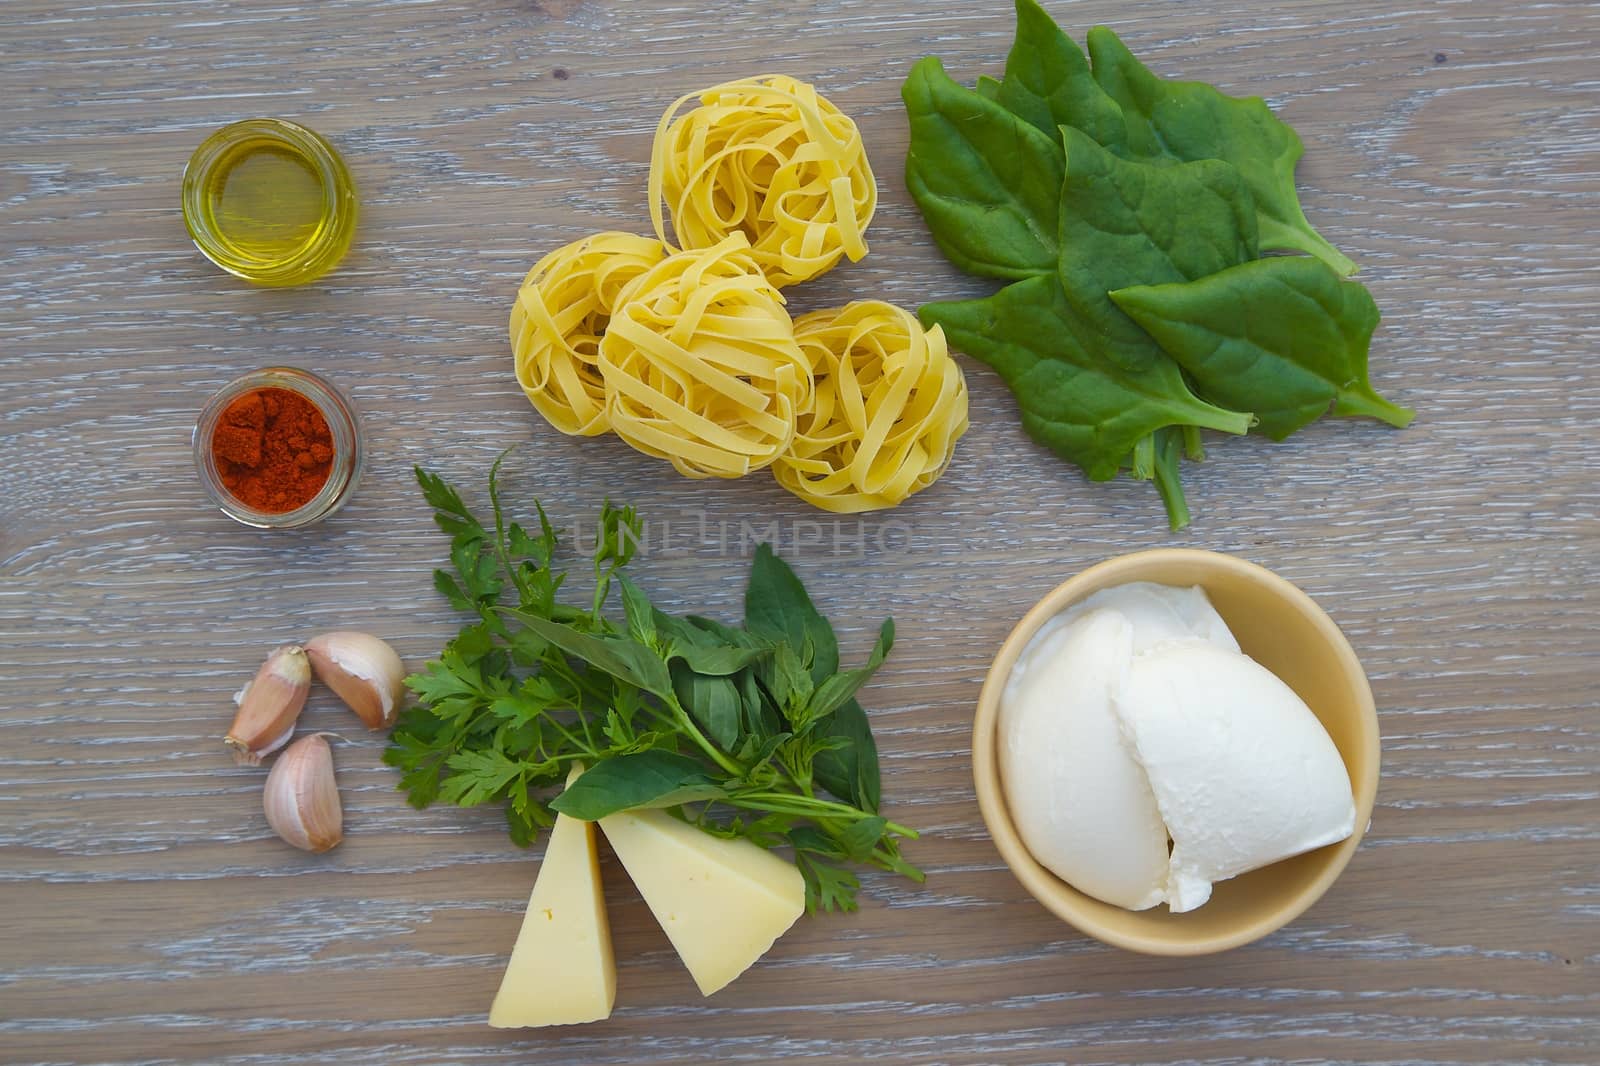 Food ingredients for preparing pasta with ricotta and spinach on the wooden surface